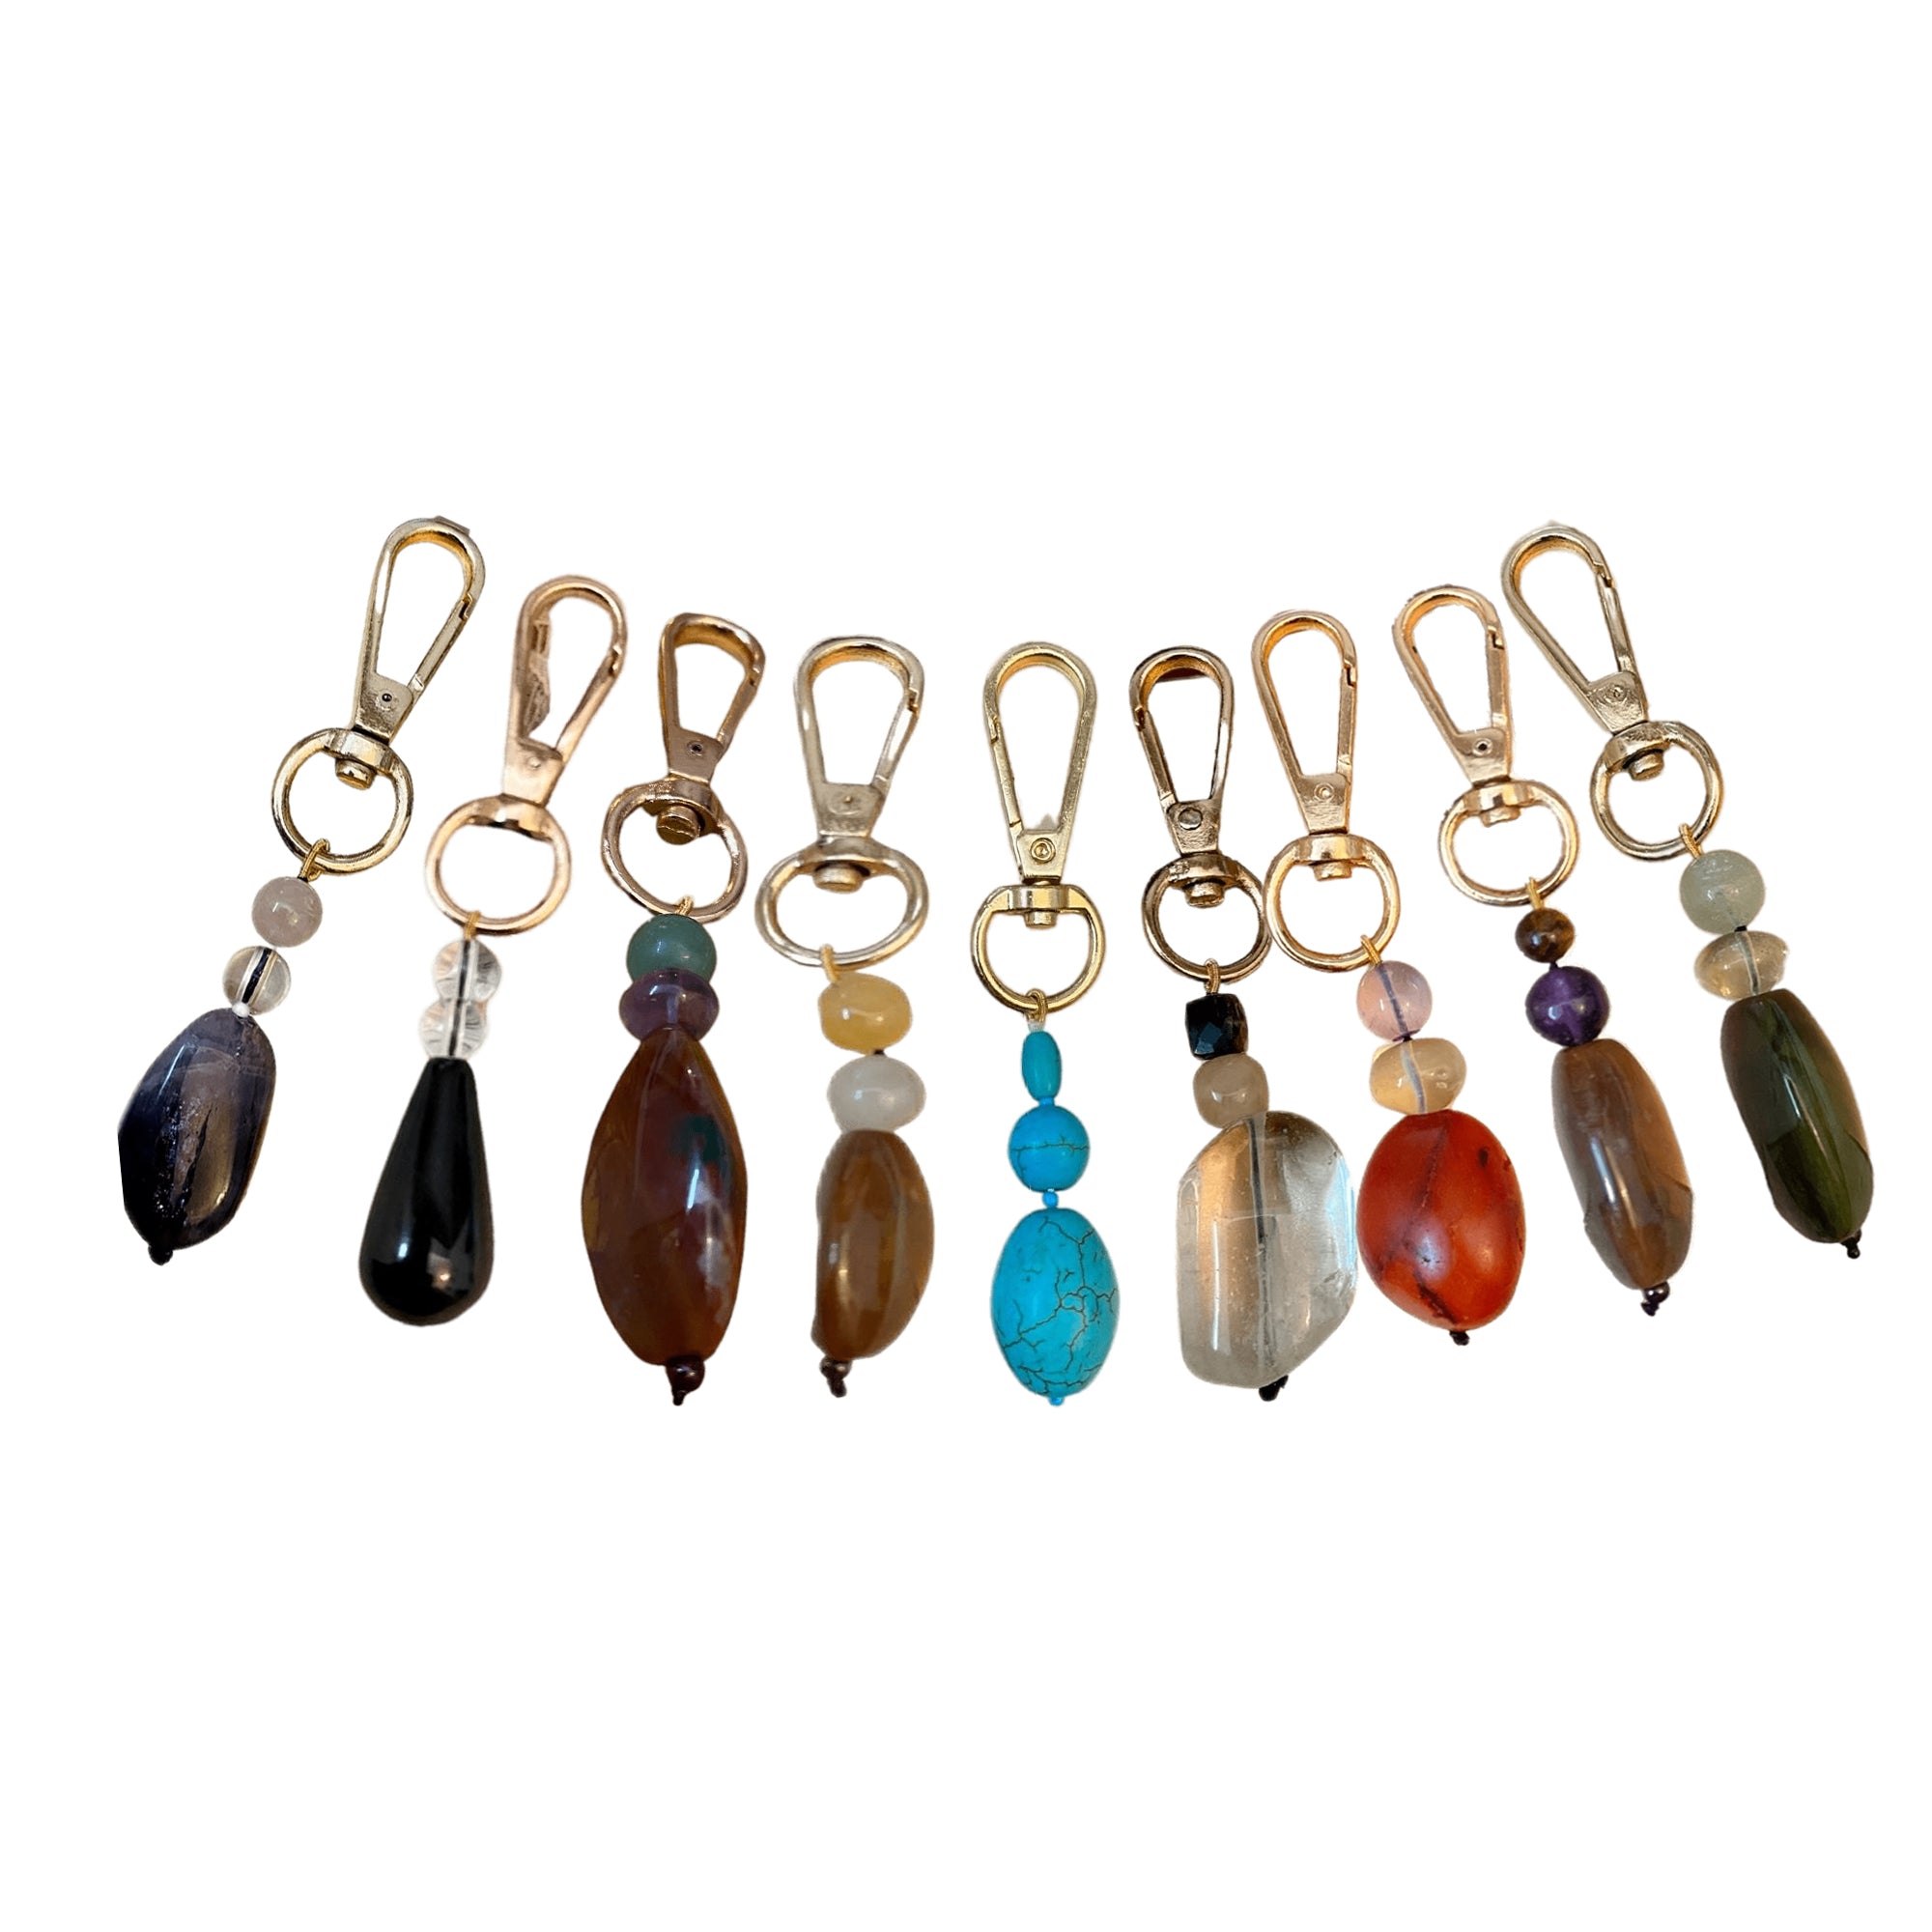 Amulet Accessory Key Chains in combination of 2 or 3 gemstones